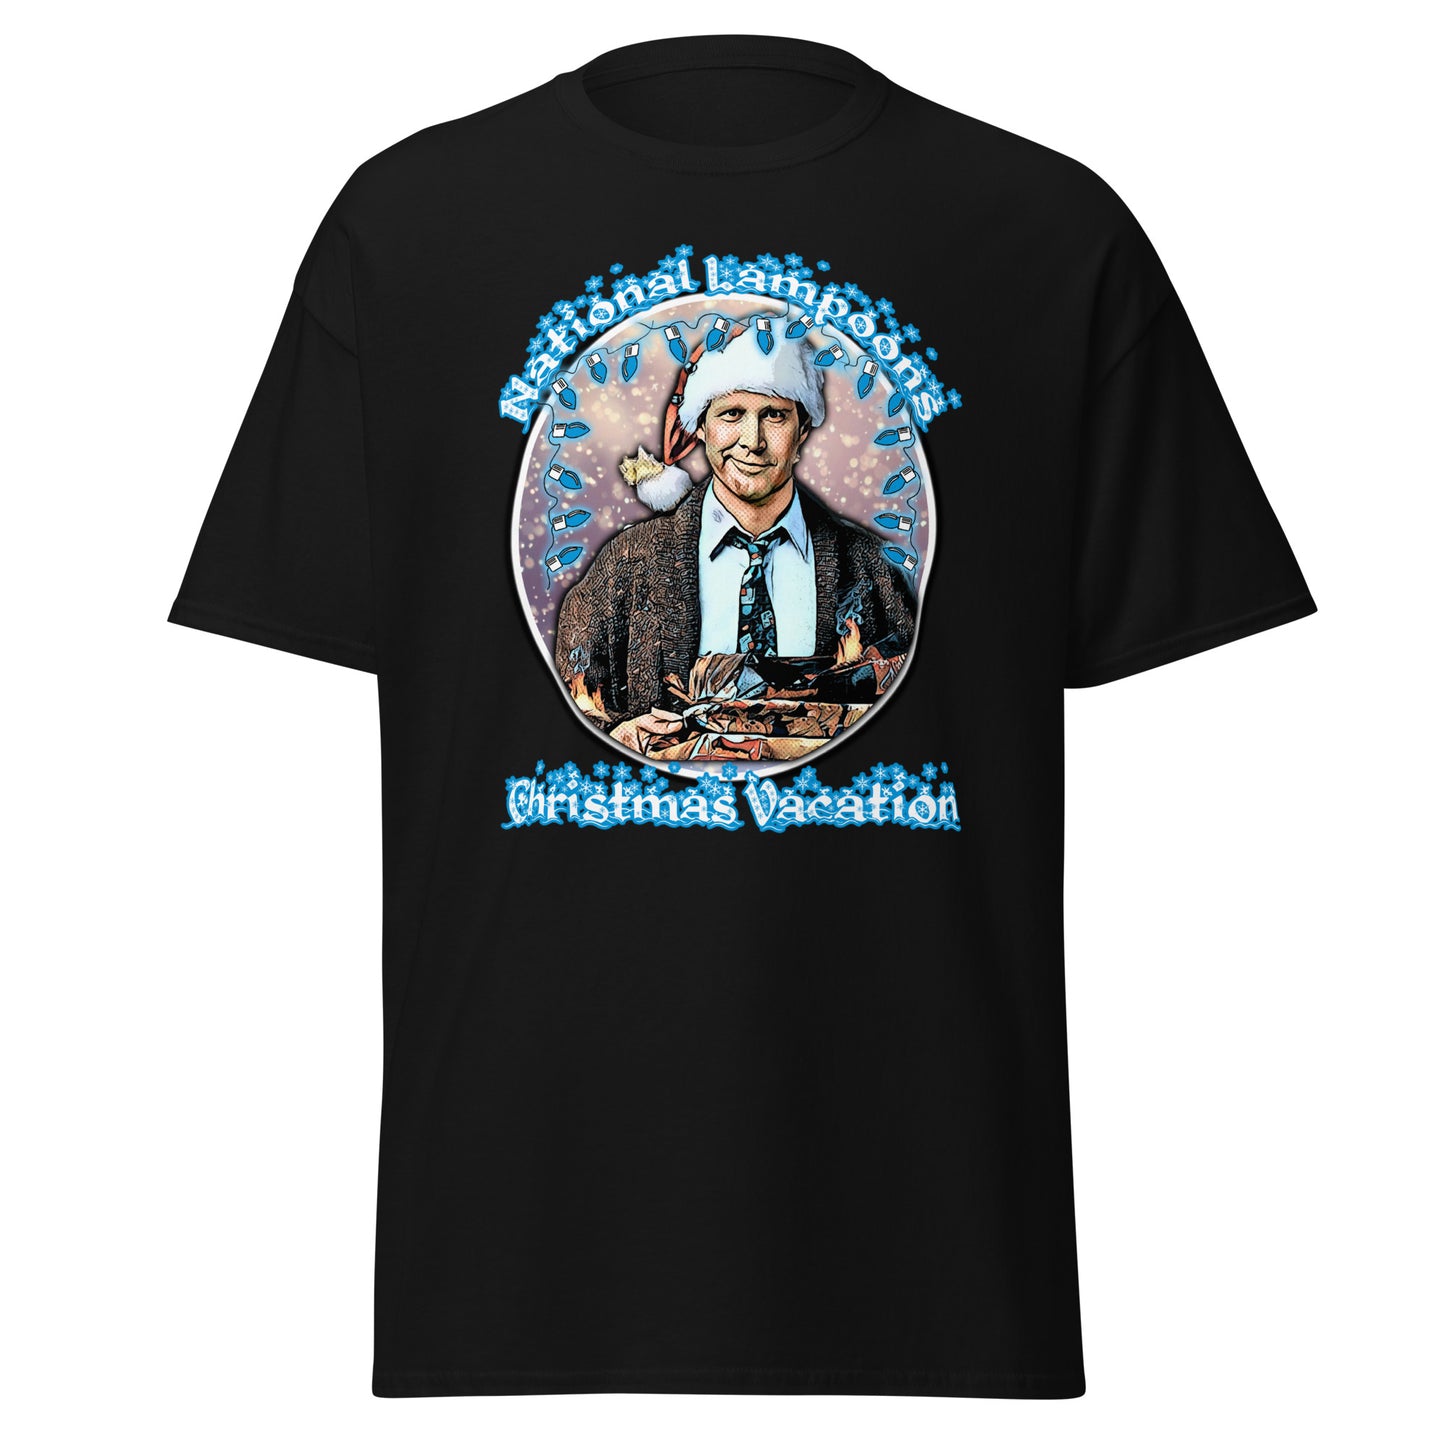 Christmas Vacation T-Shirt - Embrace the Griswold Family Fun